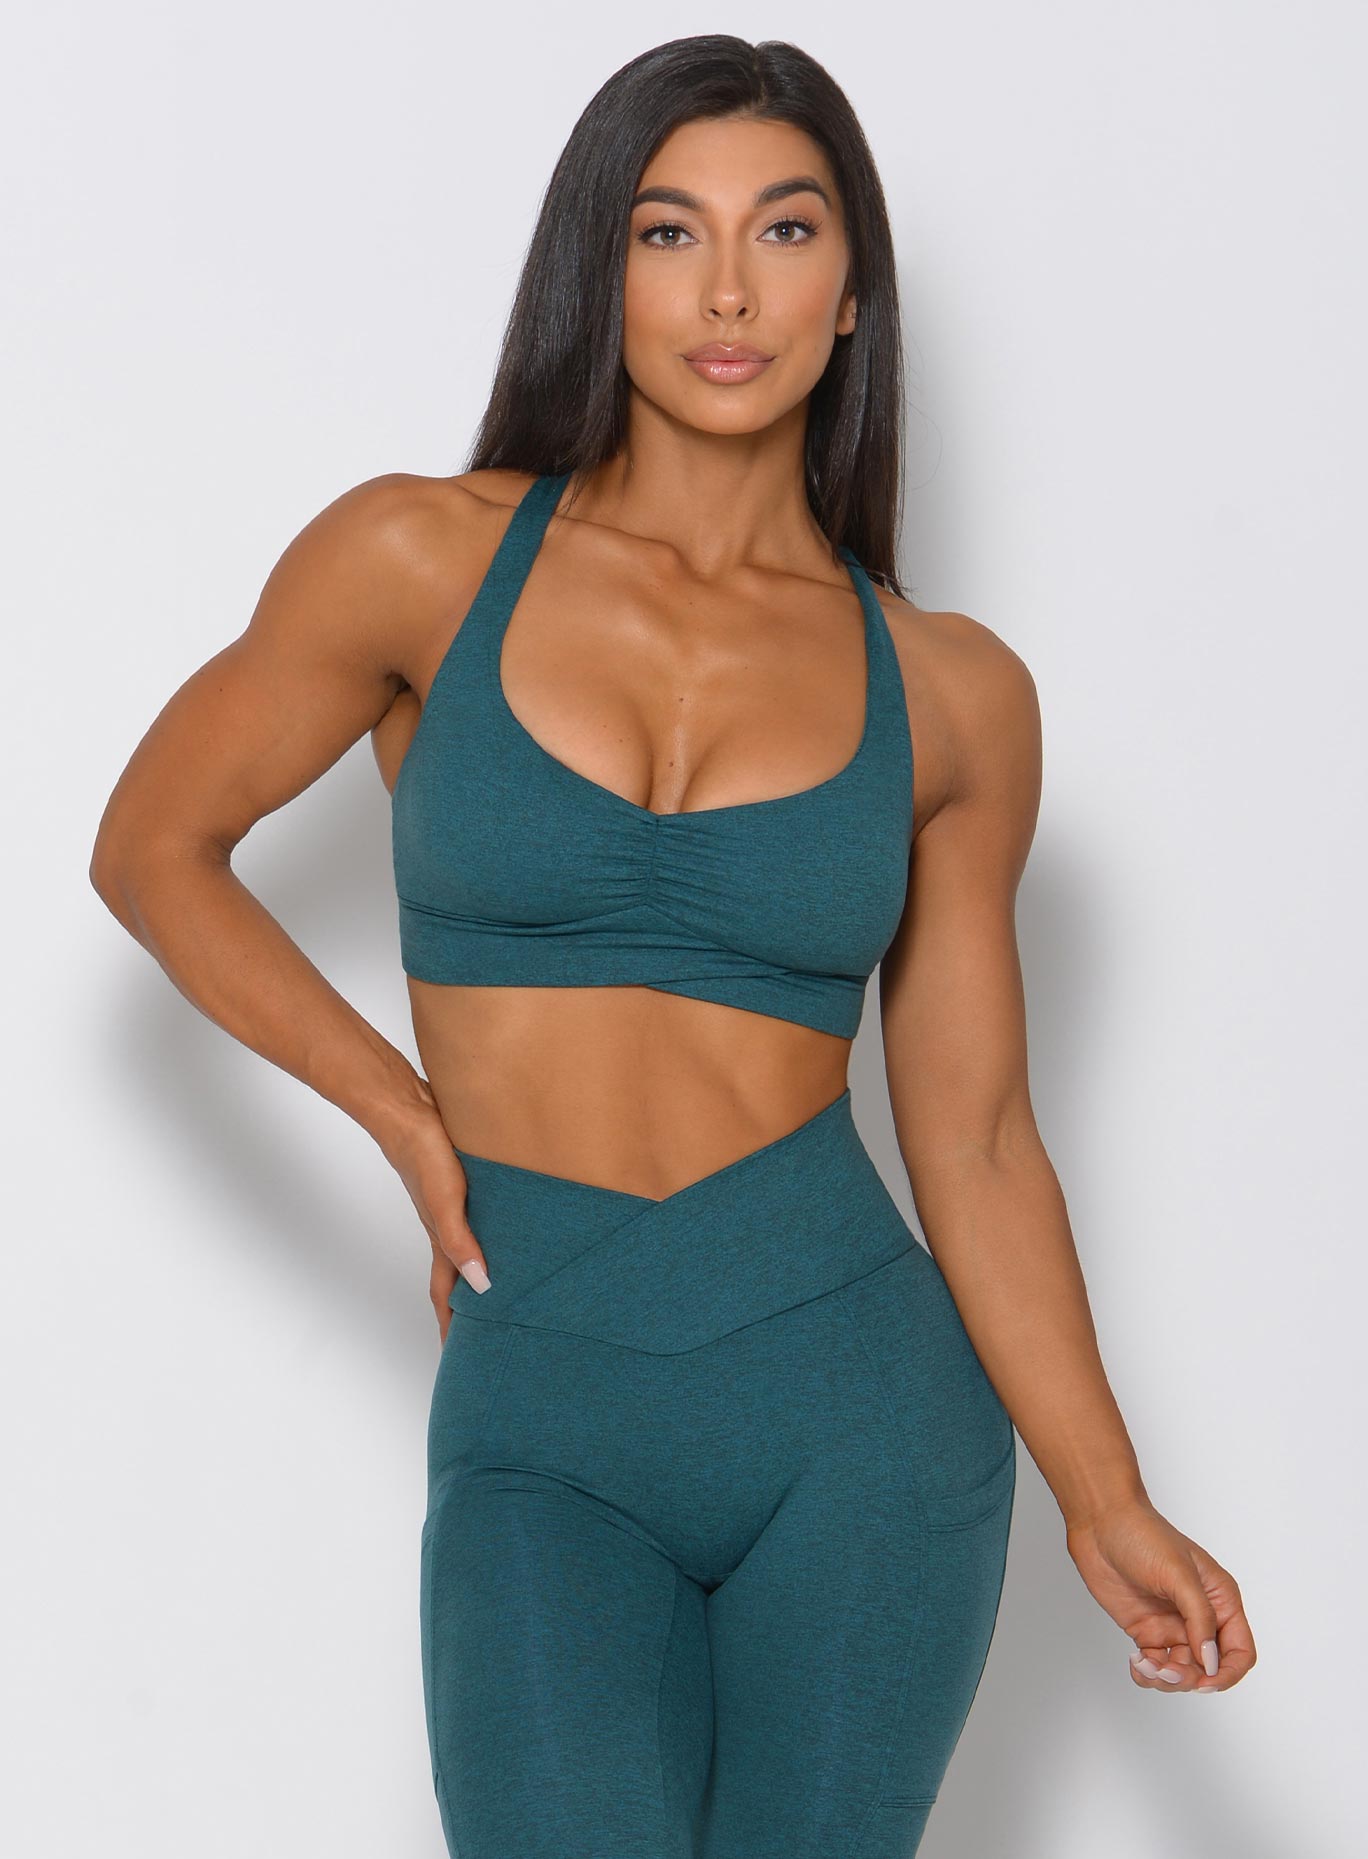 model in teal angel bra facing front arm on hip